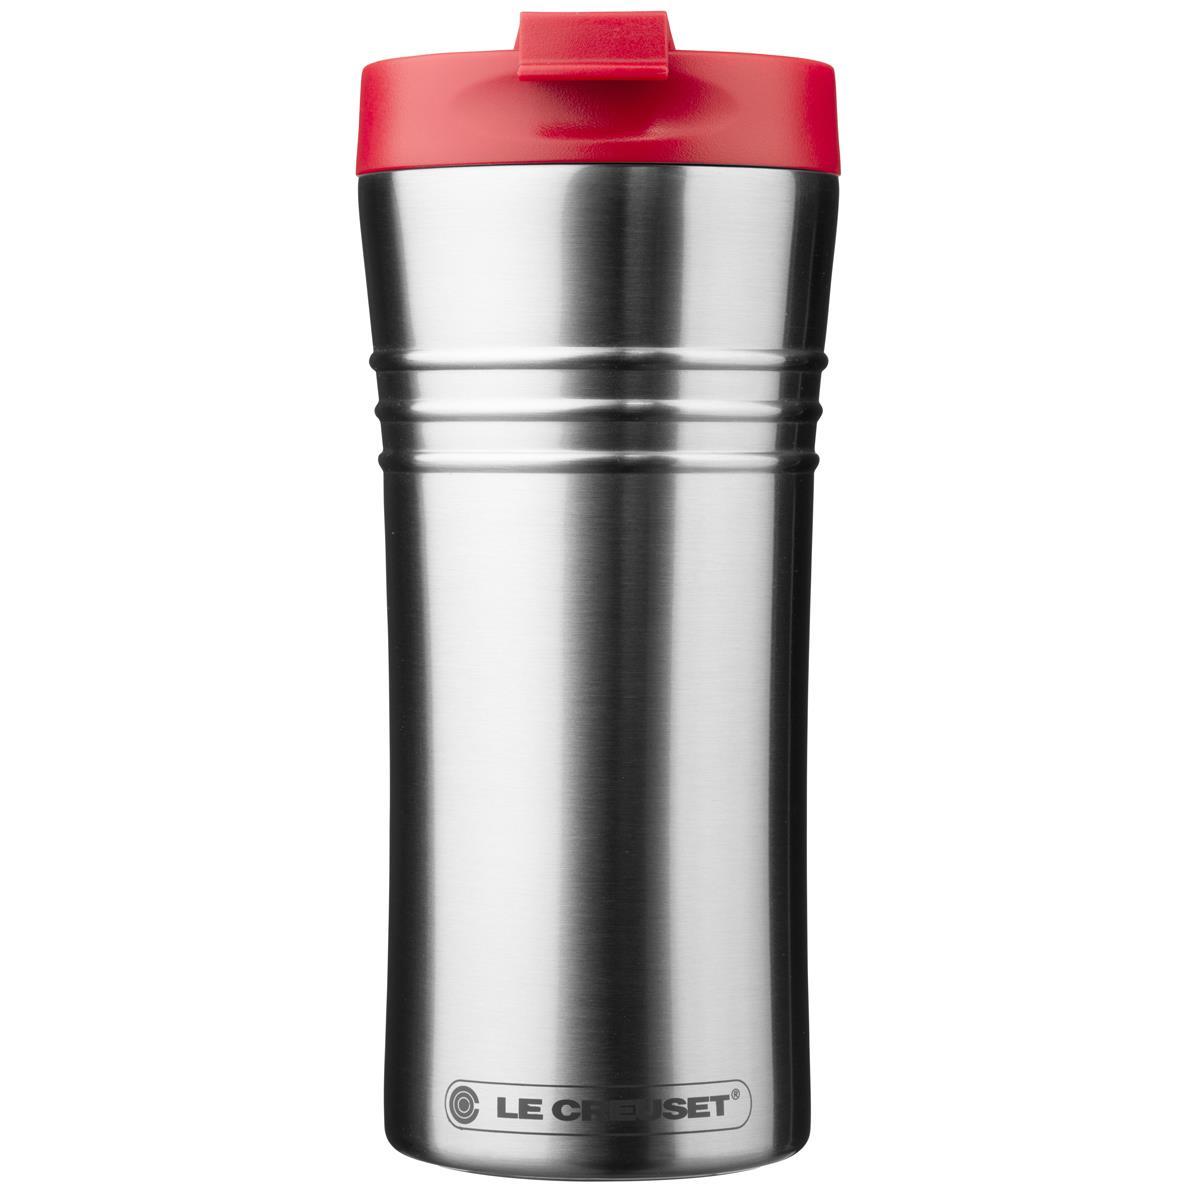 What colours & sizes does the Le Creuset travel mug offer?